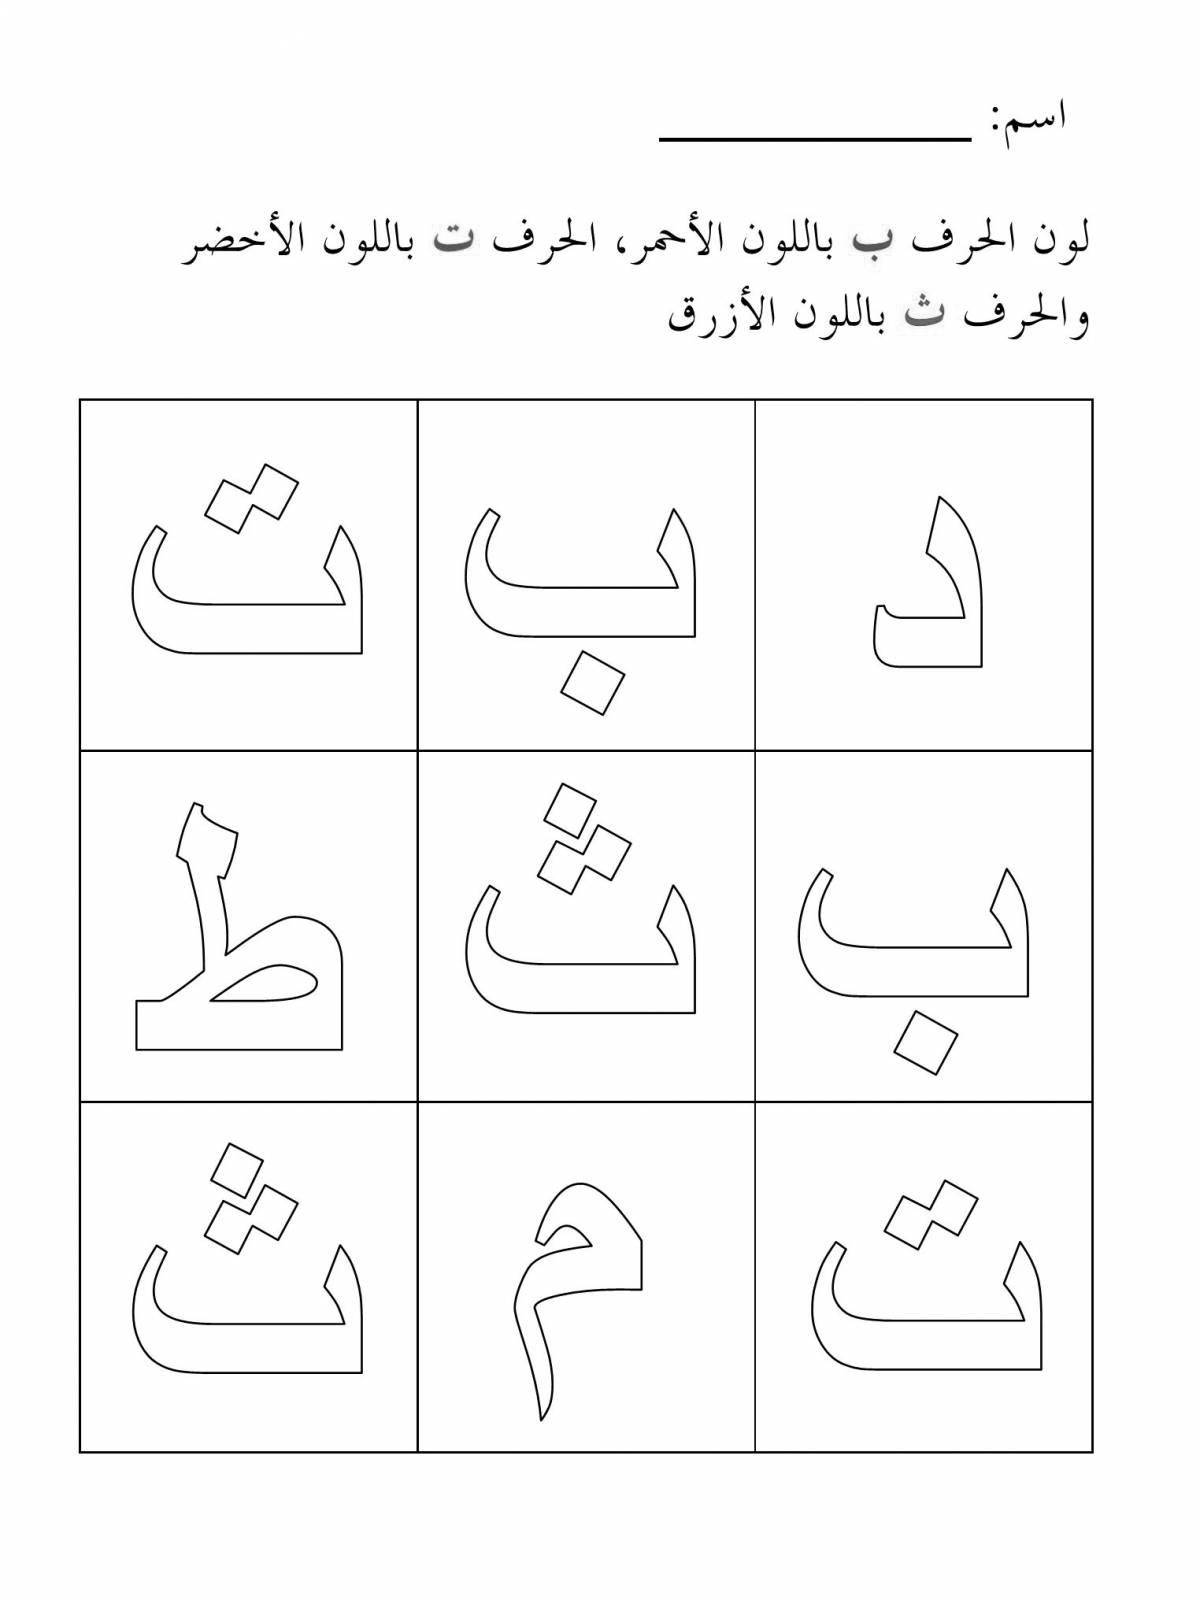 Colorful Arabic alphabet coloring page for juniors